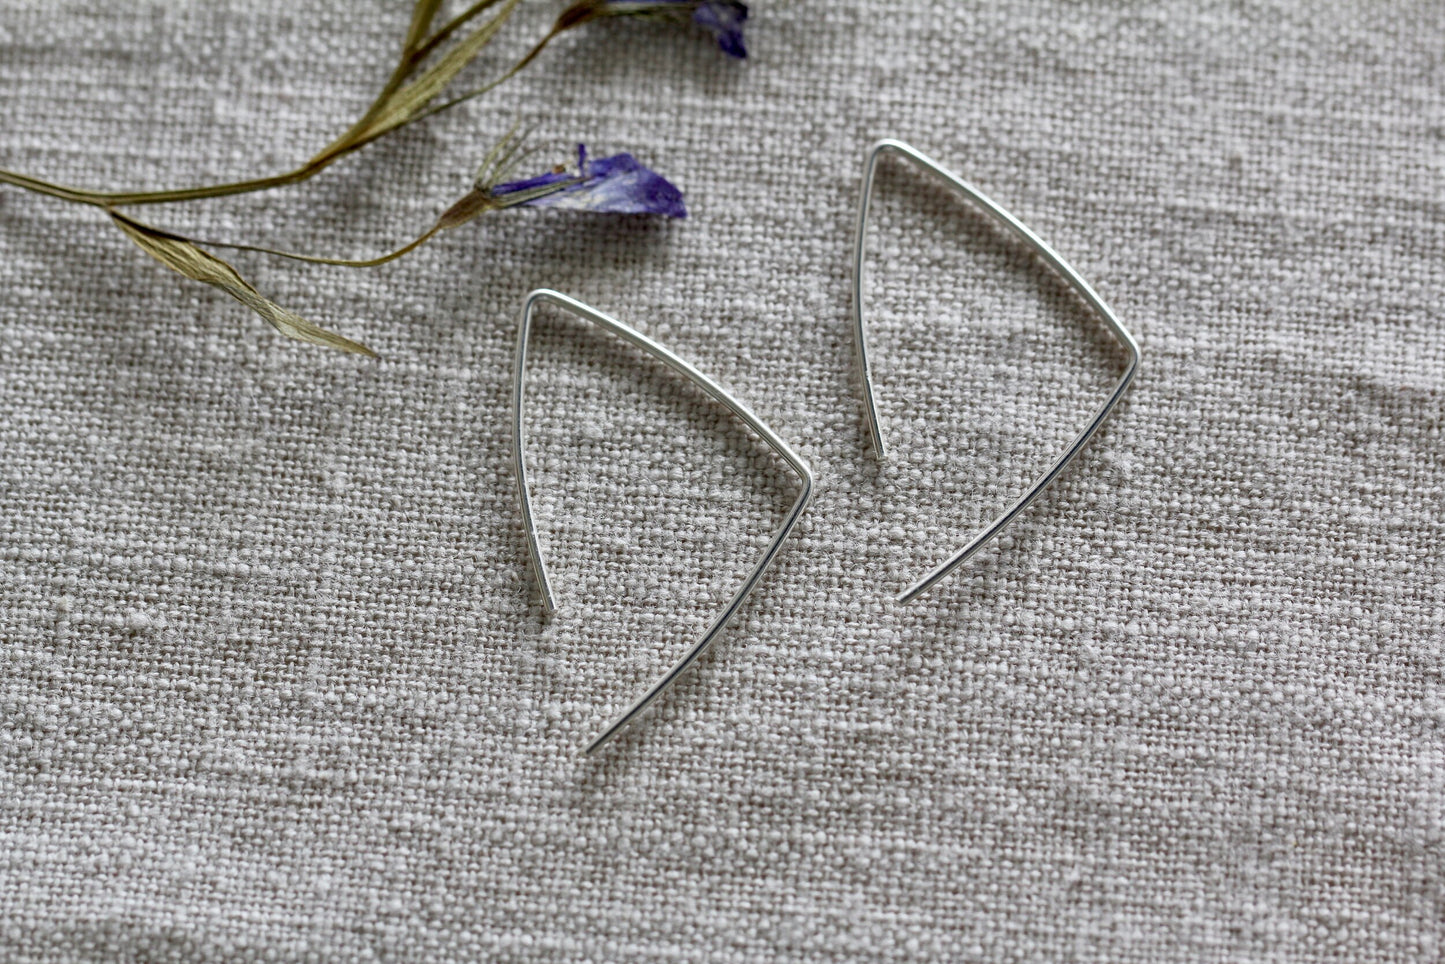 MIA CURVED WIRE EARRINGS - The Bristol Artisan Handmade Sustainable Gifts and Homewares.